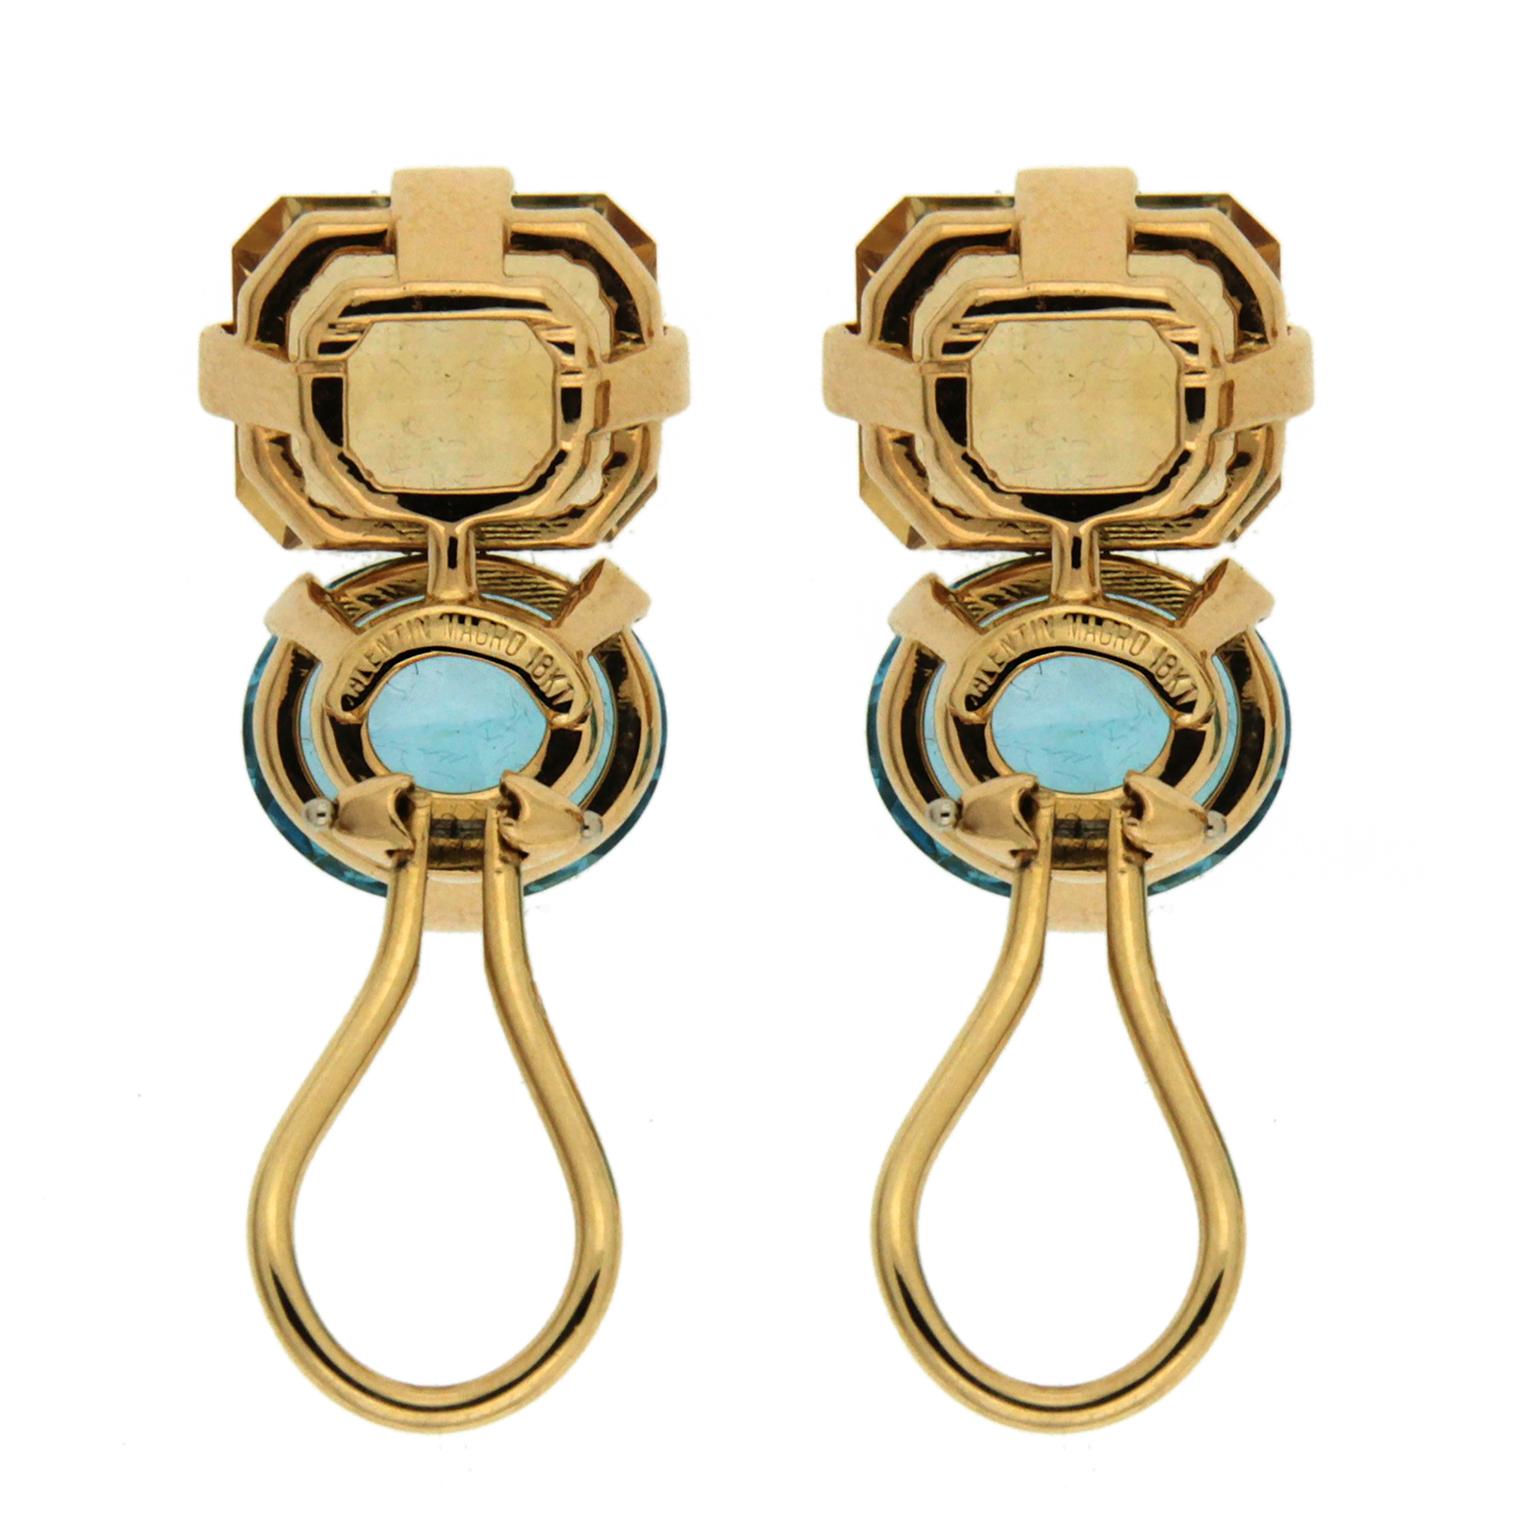 A shock of blue energizes these gold earrings created by Valentin Magro. The body is 18k yellow gold, an emerald cut citrine matching the metal’s hue fills the design’s upper half. Underneath are oval shaped topaz with intense blue. Both gems are